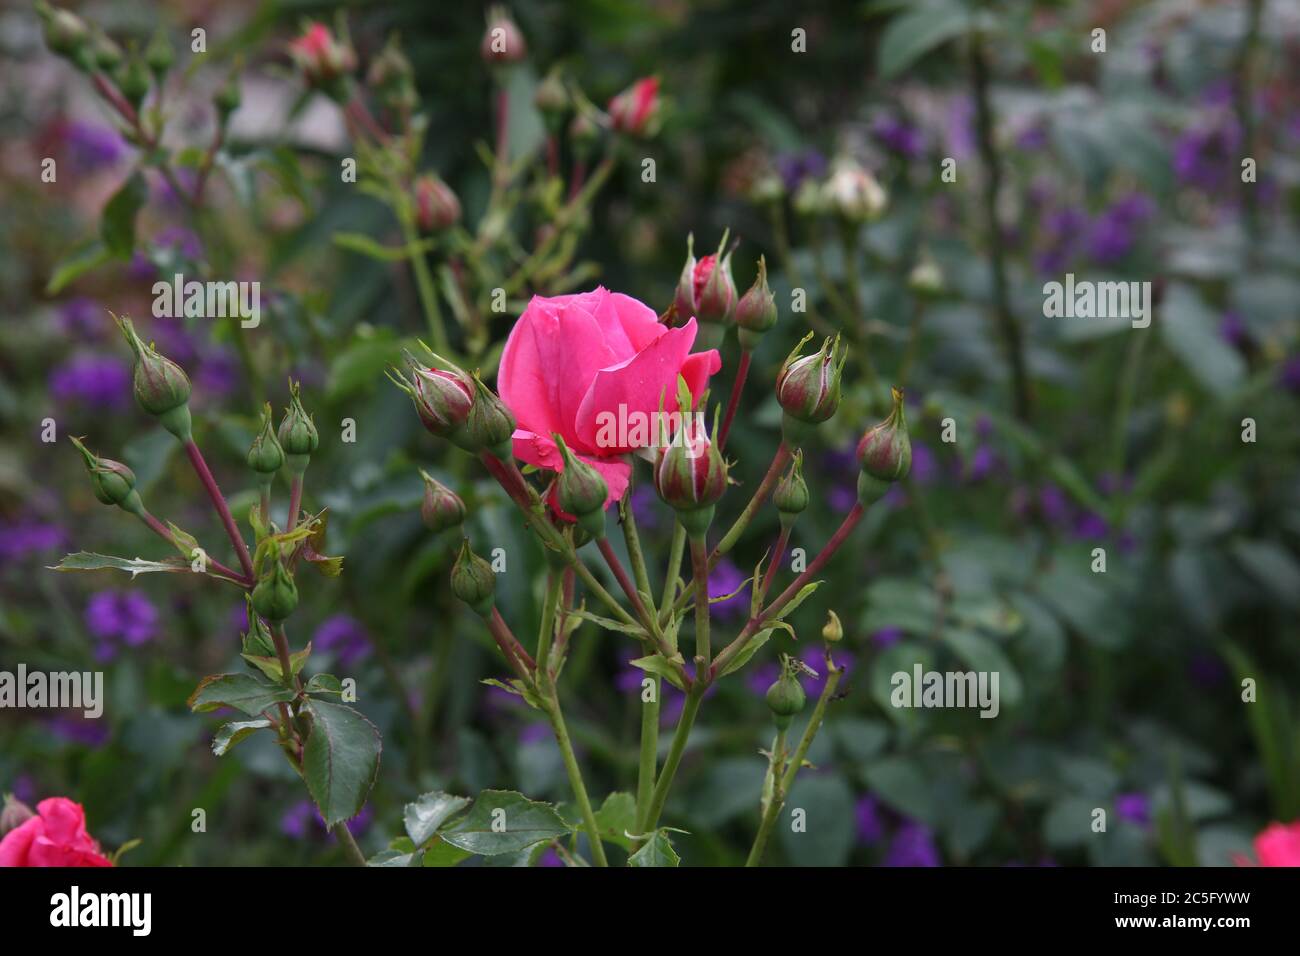 Single opening pink rose surrounded by rose buds. Intensive pink color. Stock Photo